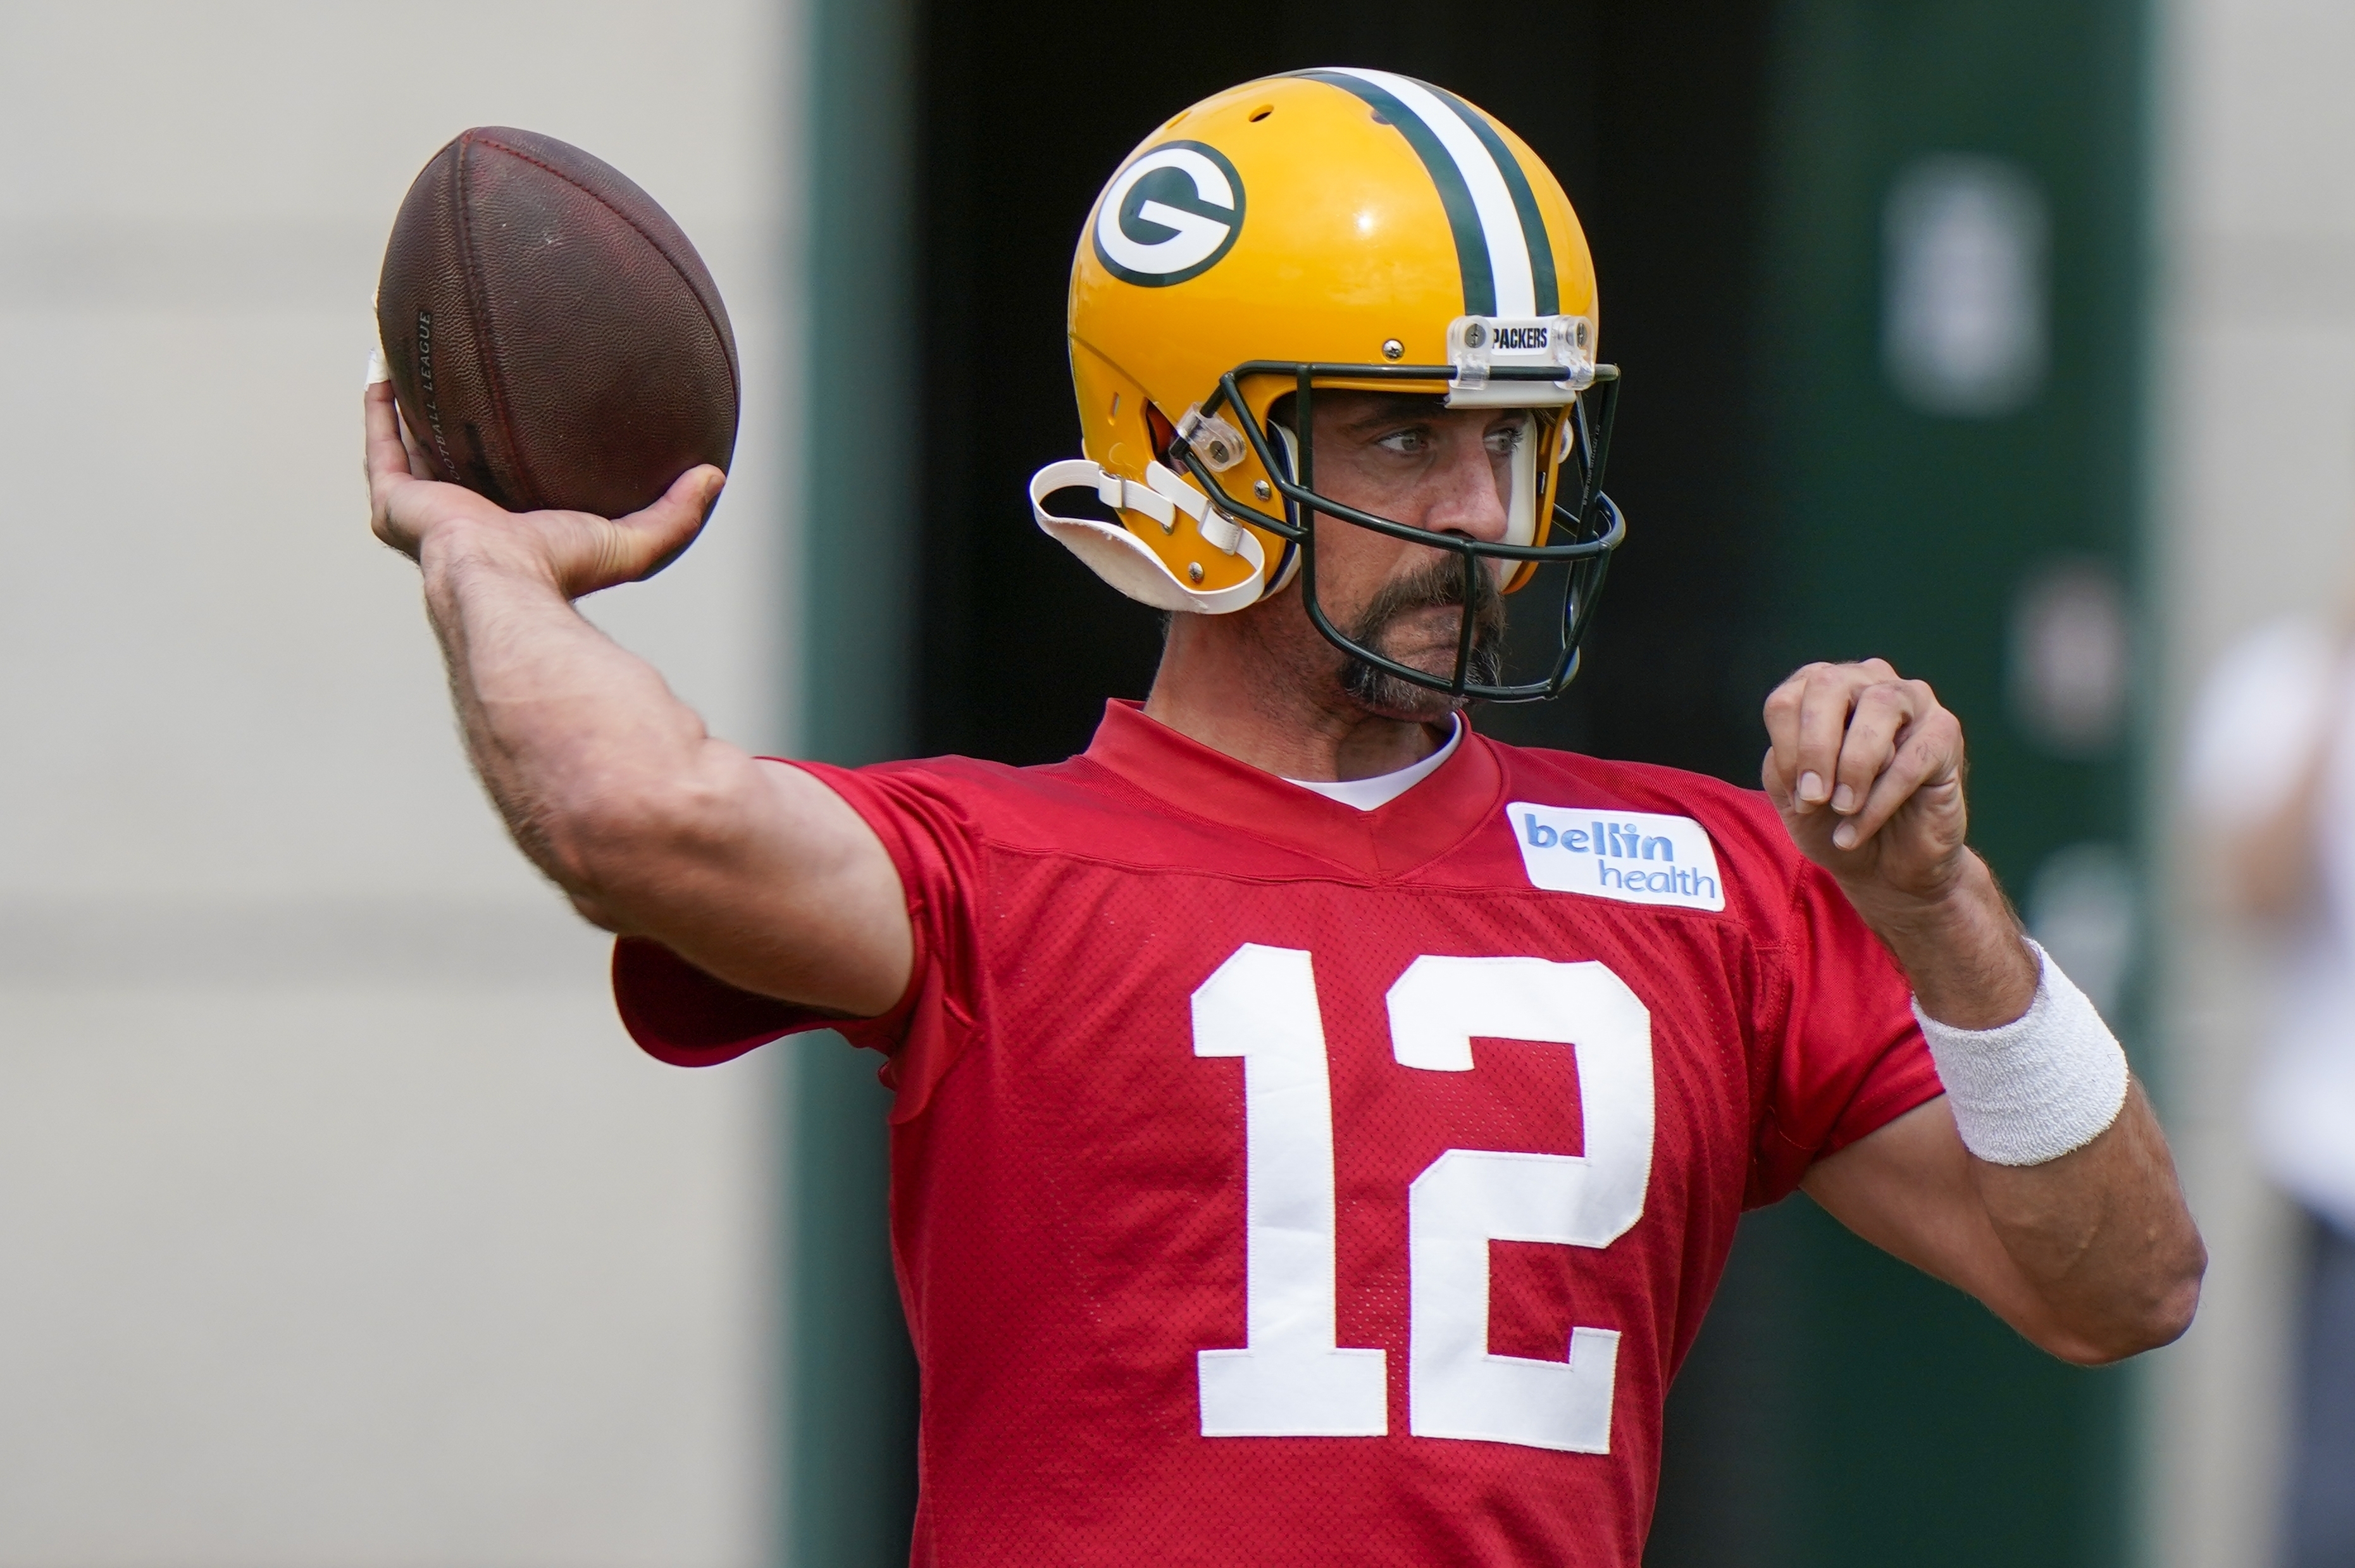 Aaron Rodgers The Office T-Shirt Where to Buy - Aaron Rodgers Arrives at  Packers Training Camp